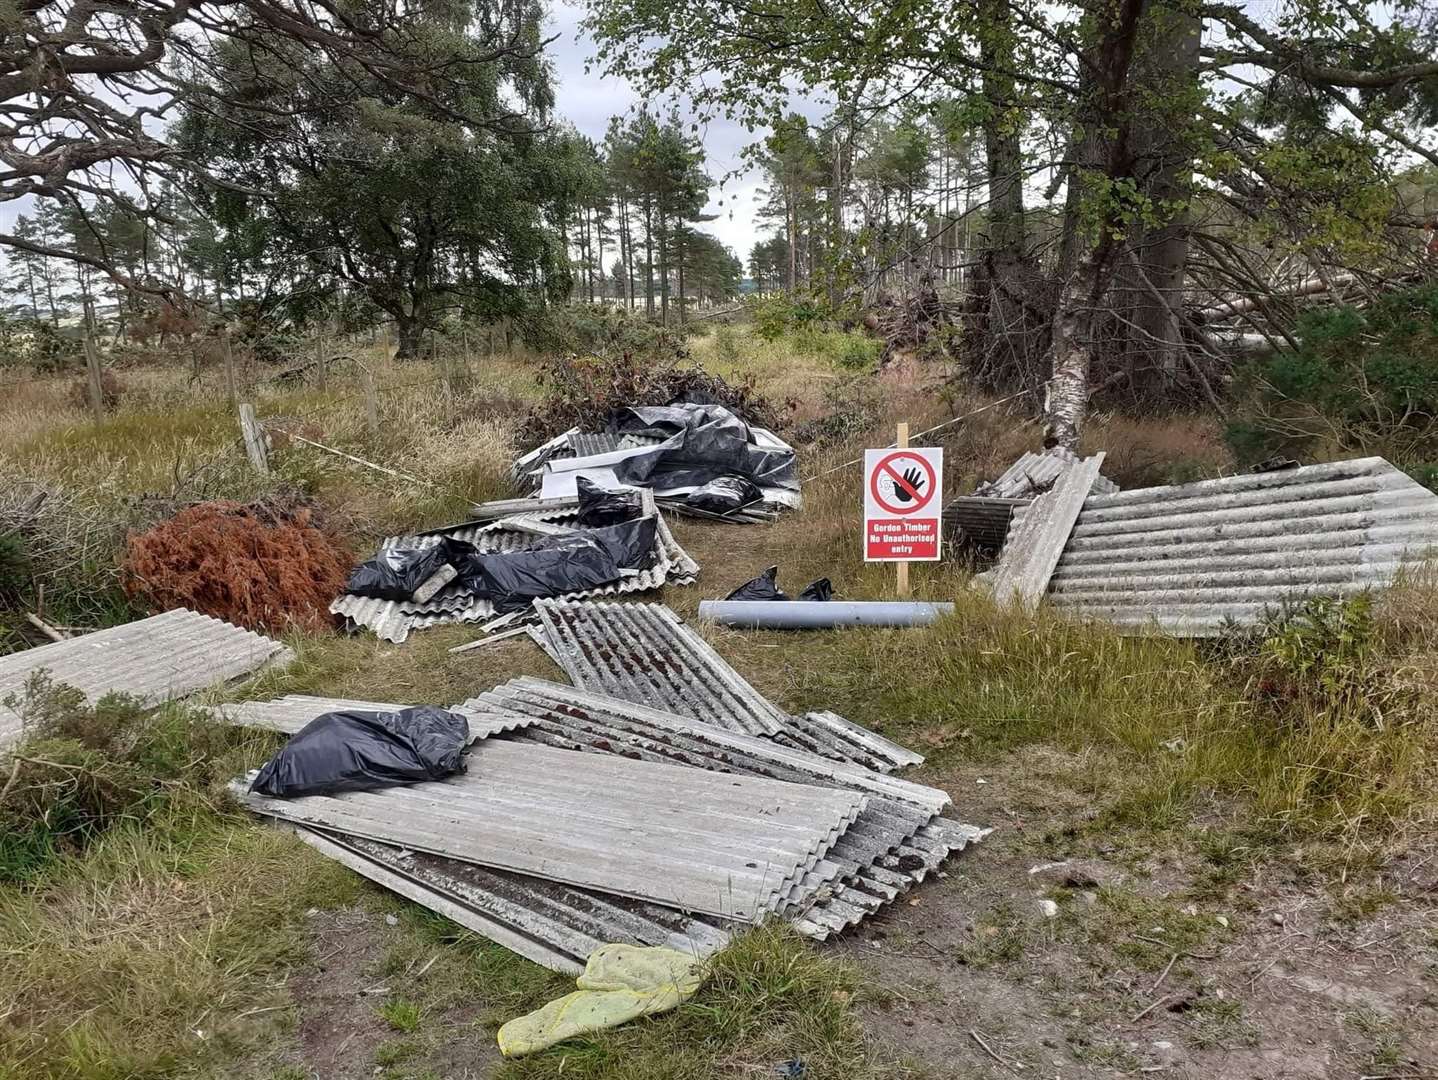 The waste left at Balbithan woods included roofing sheets and black bags.